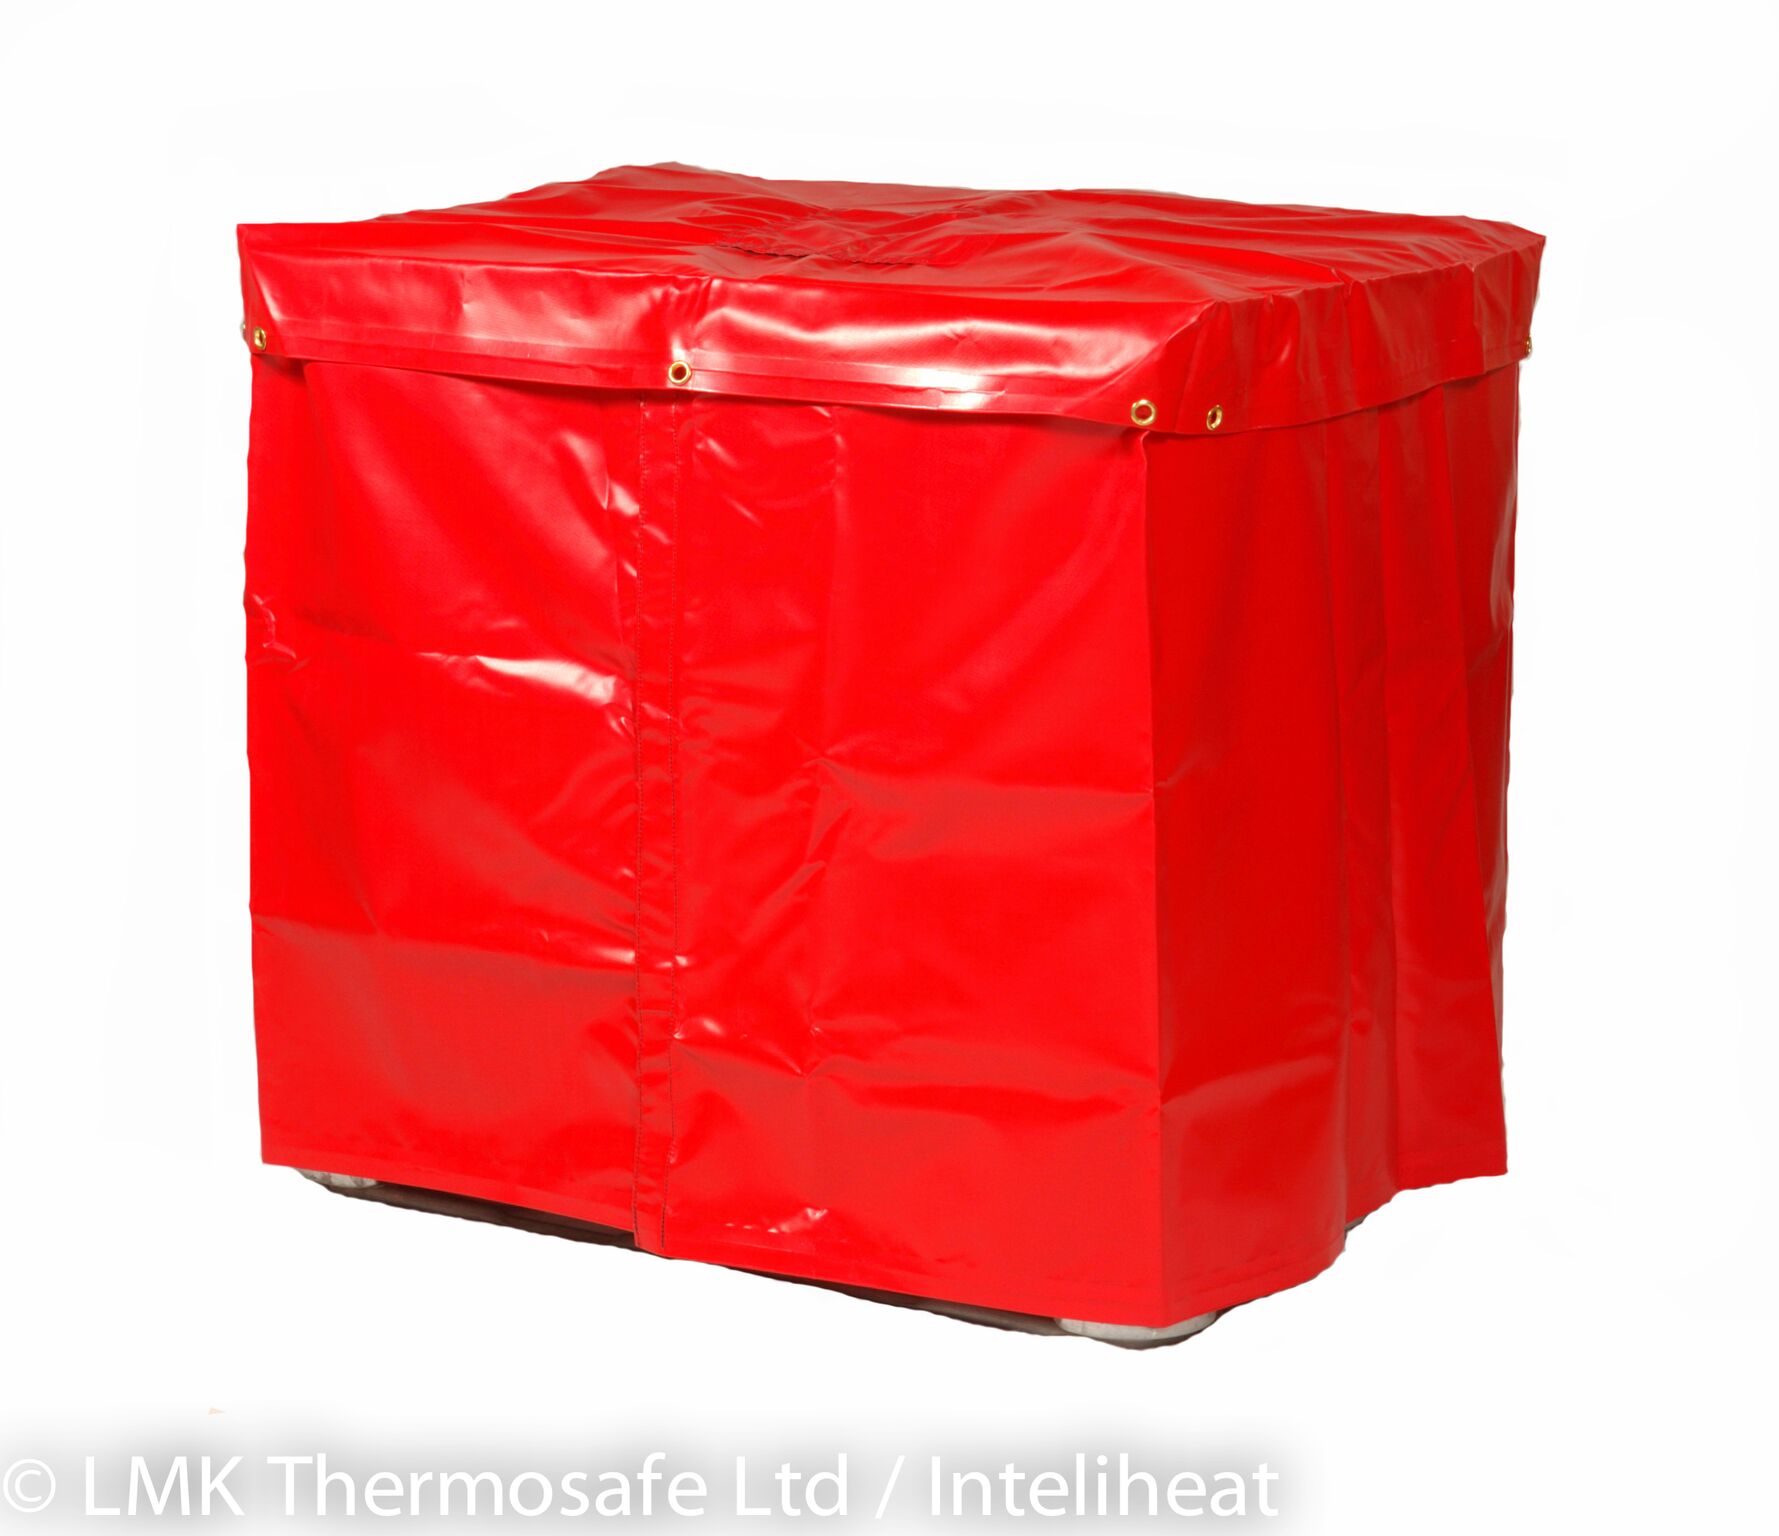 275-330 Gallon IBC Tote Tank Cover with Cap and PVC 90 